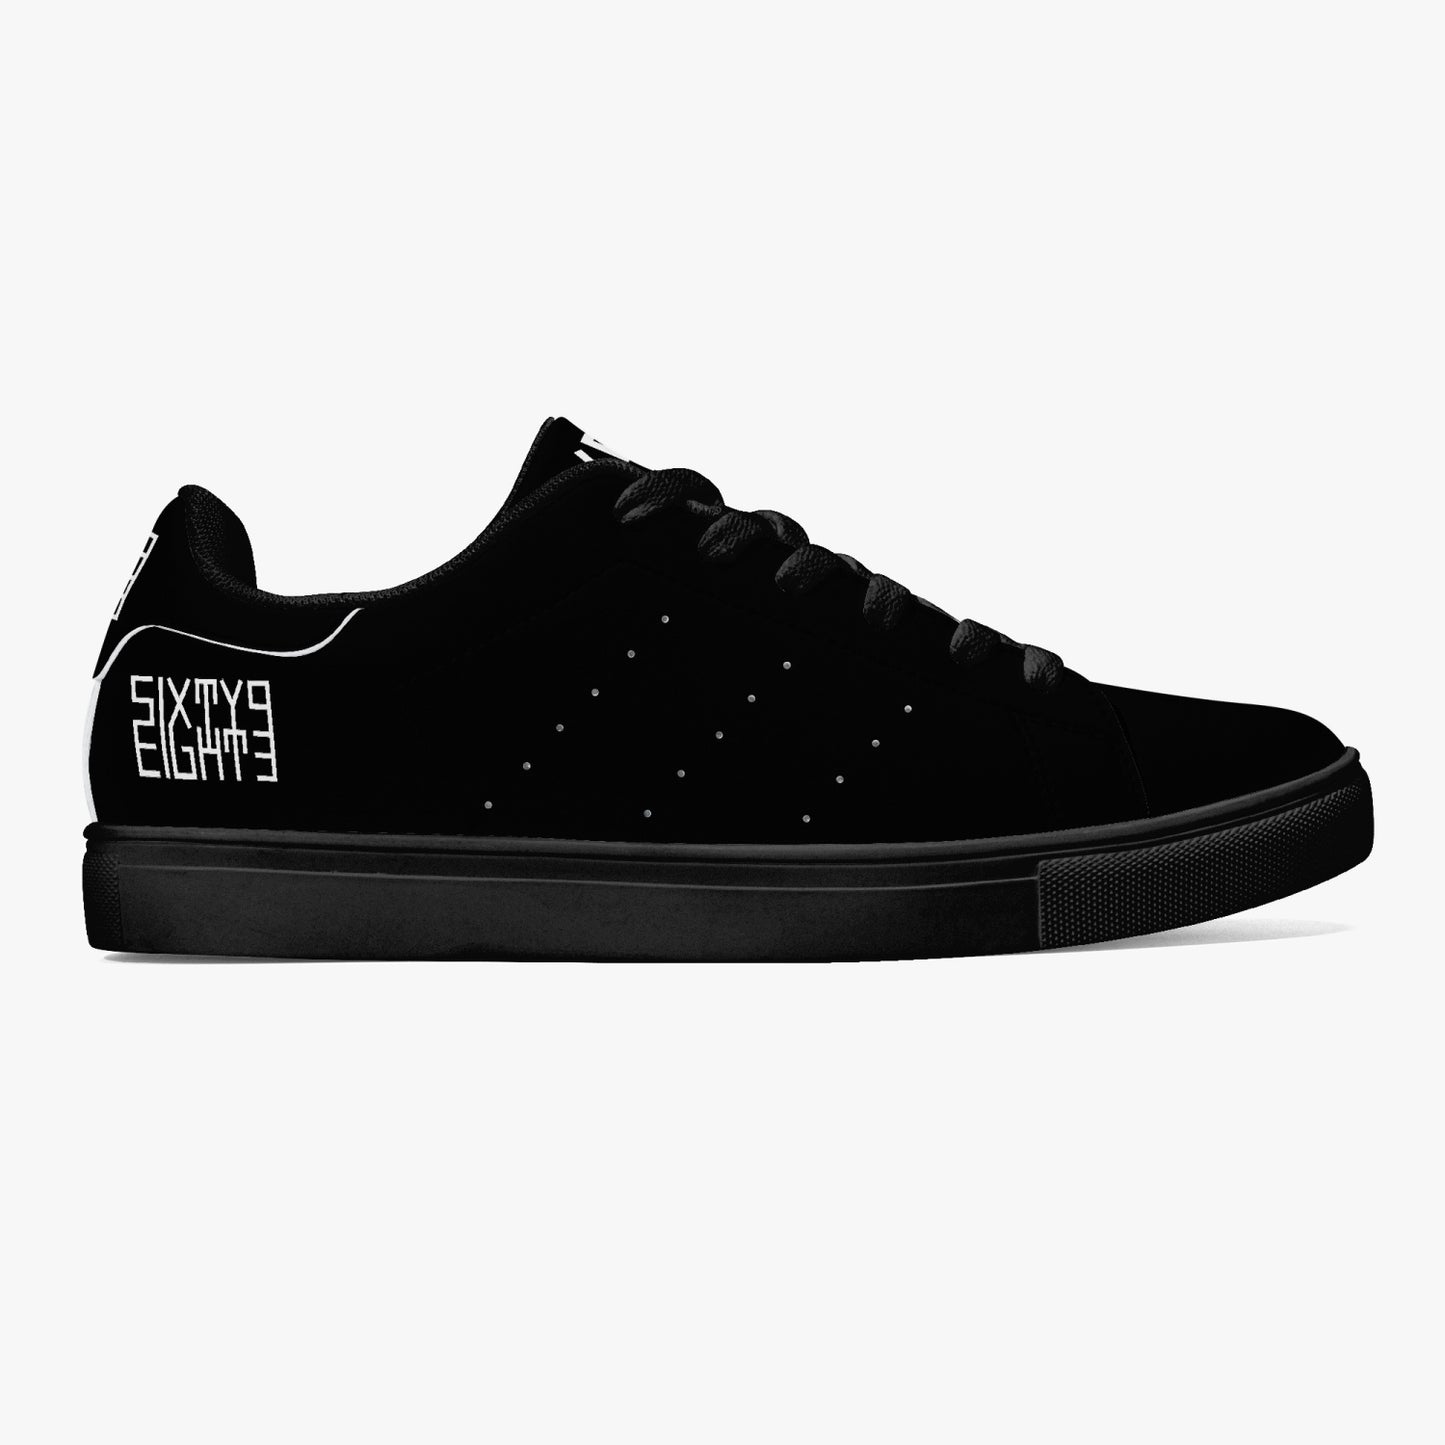 Sixty Eight 93 Logo White Black Classic Low-Top Leather Shoes